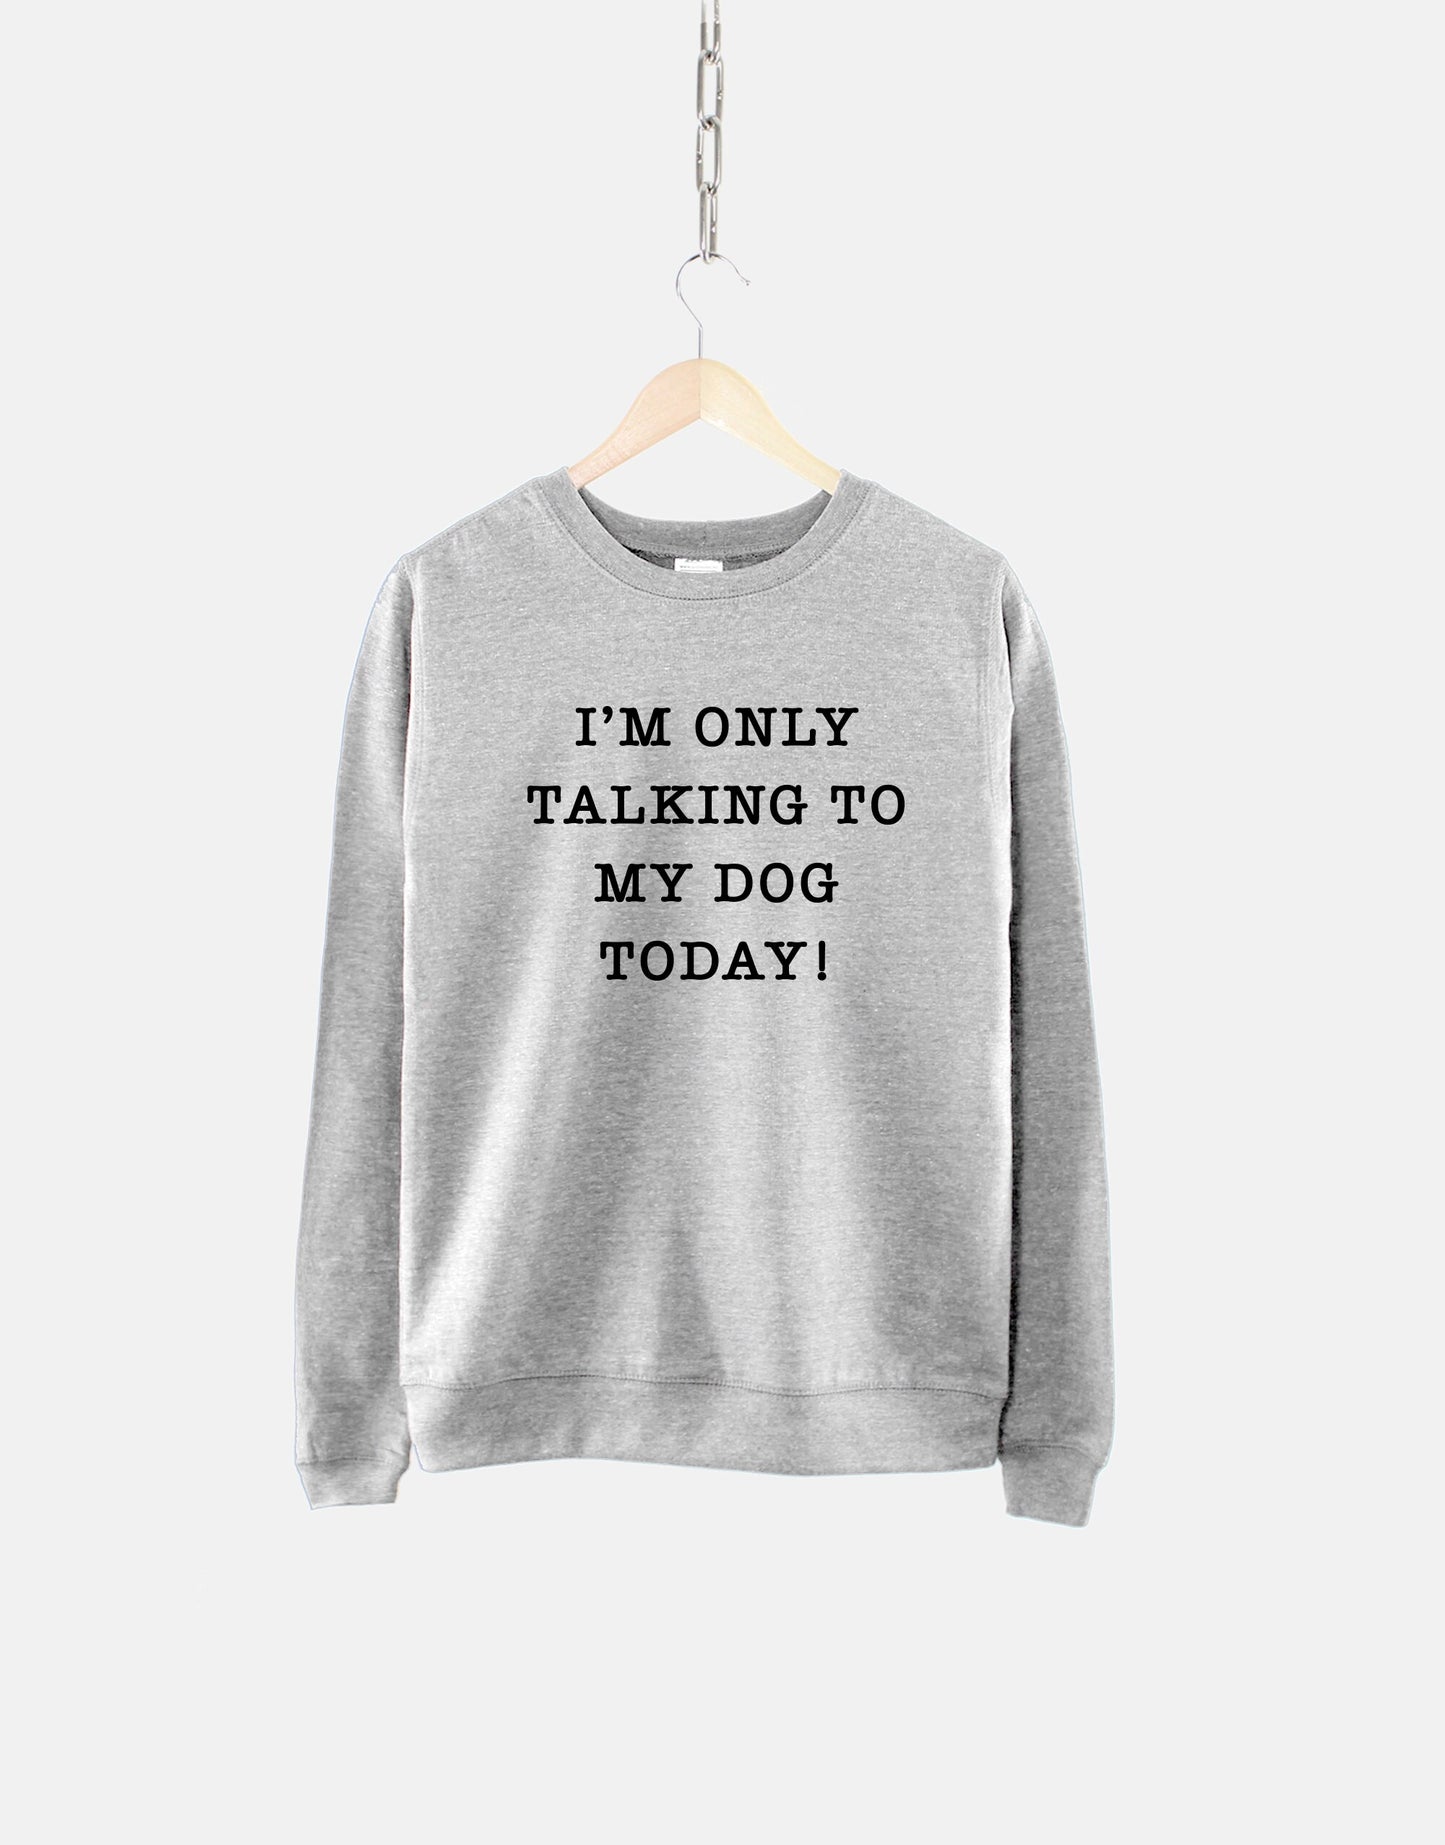 I'm Only Talking To My Dog Today Sweatshirt - Dog Mama Sweatshirt - Dog Mum Sweatshirt - Dog Owner Jumper - Dog Lover Gift